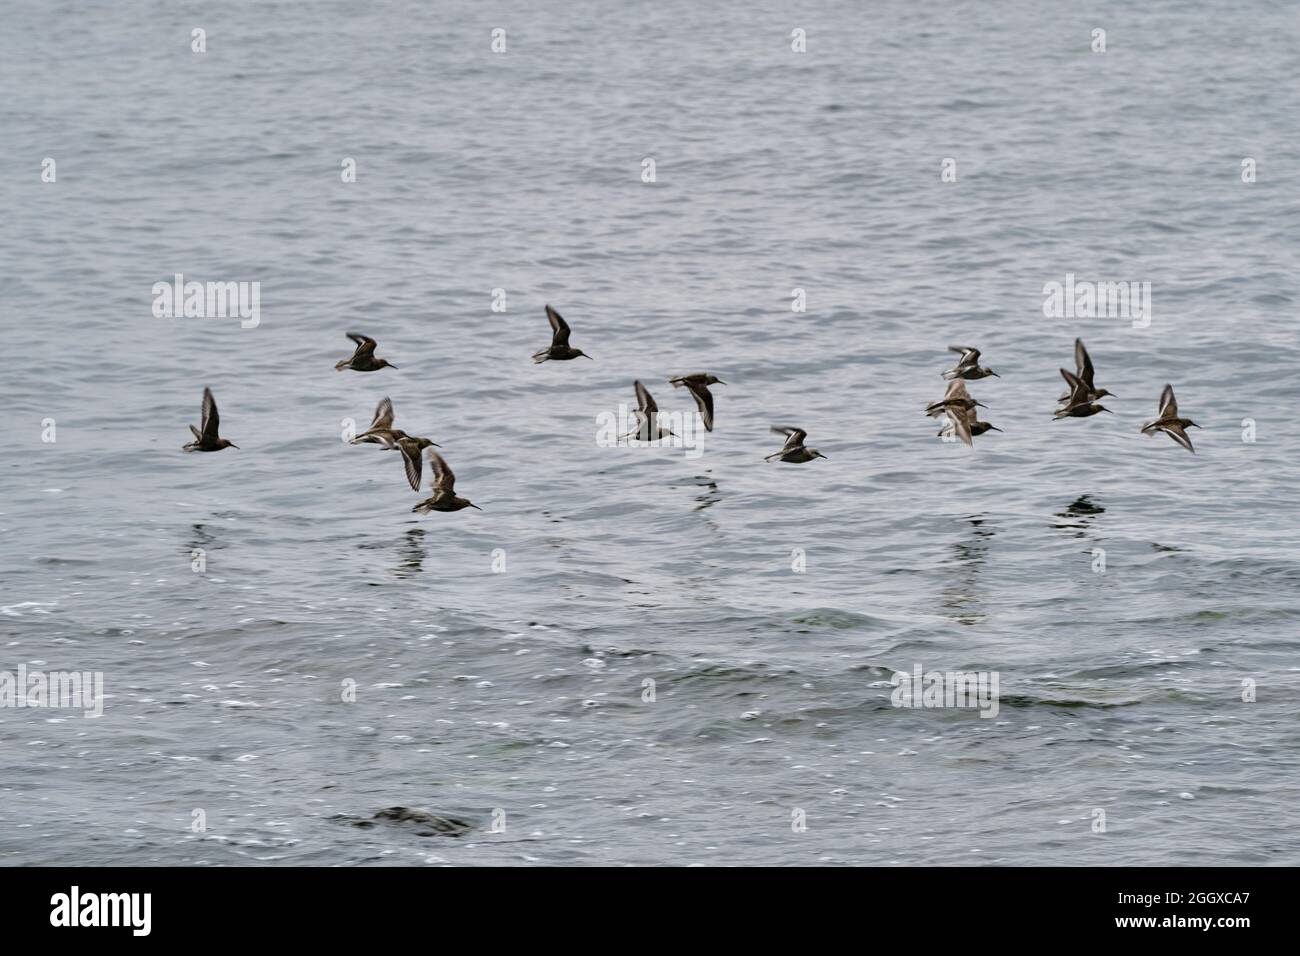 Small birds over the water surface, Baltic Sea Stock Photo